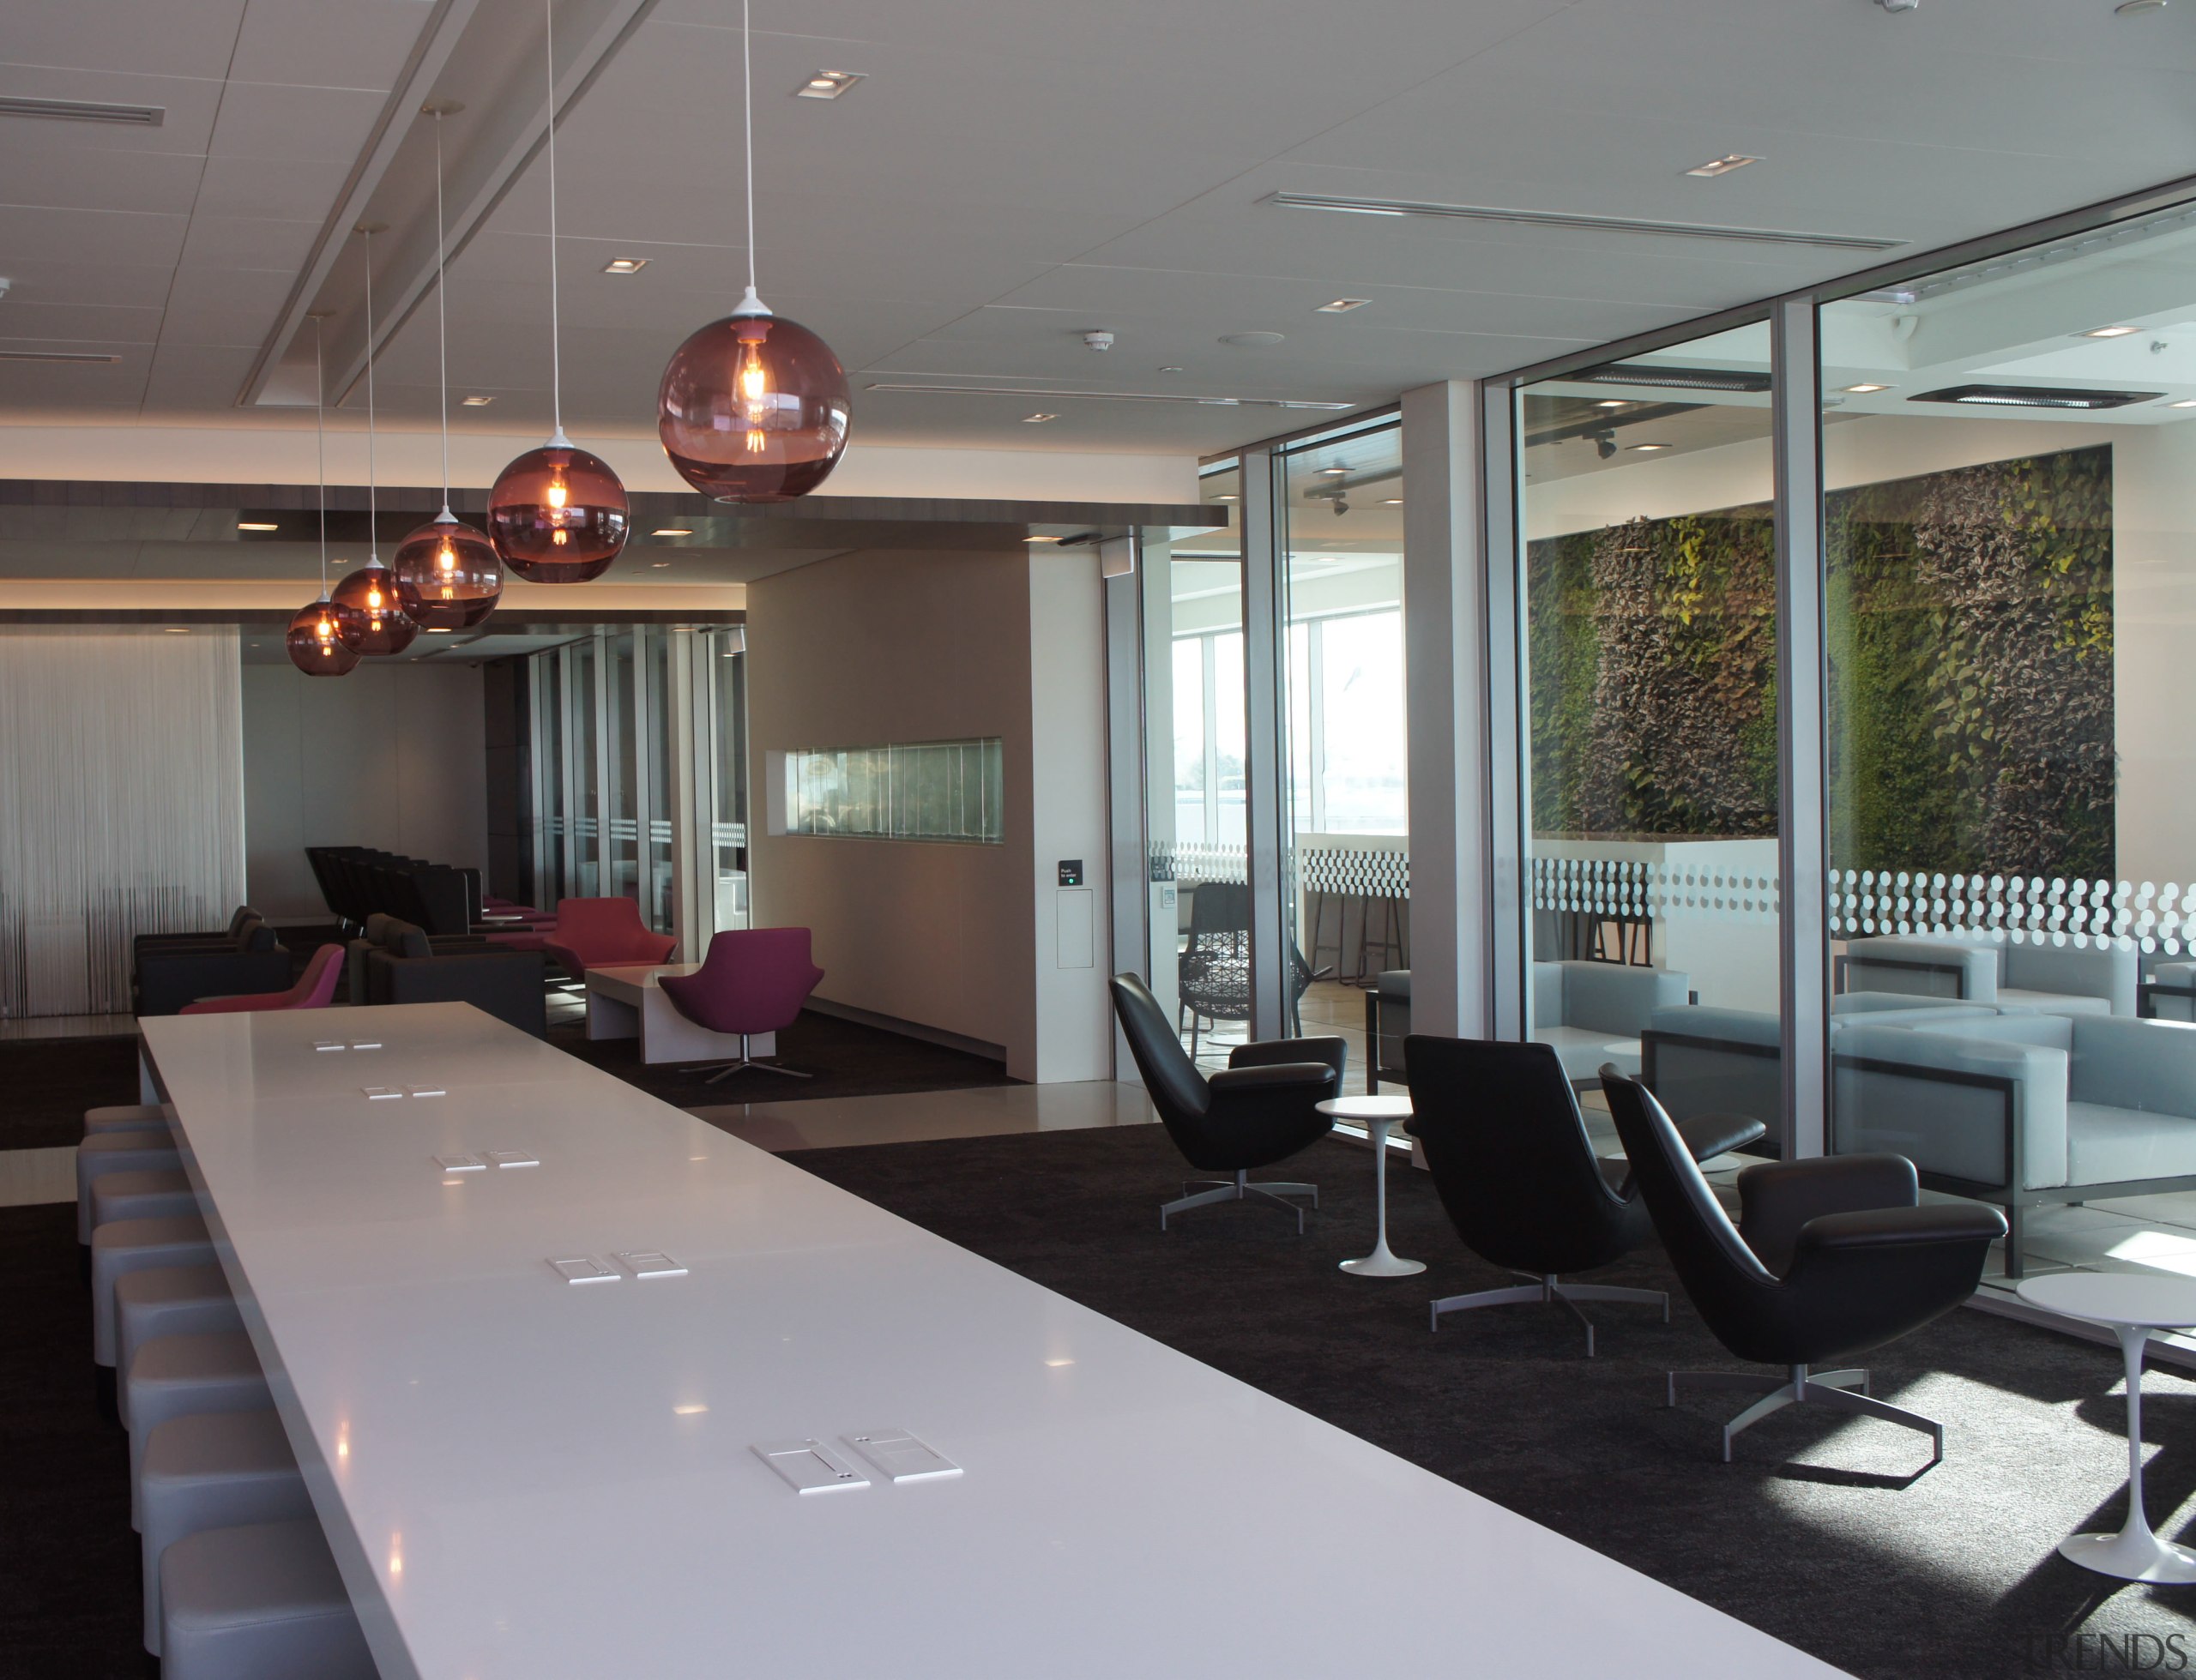 This business zone in the Air New Zealands interior design, office, table, gray, black